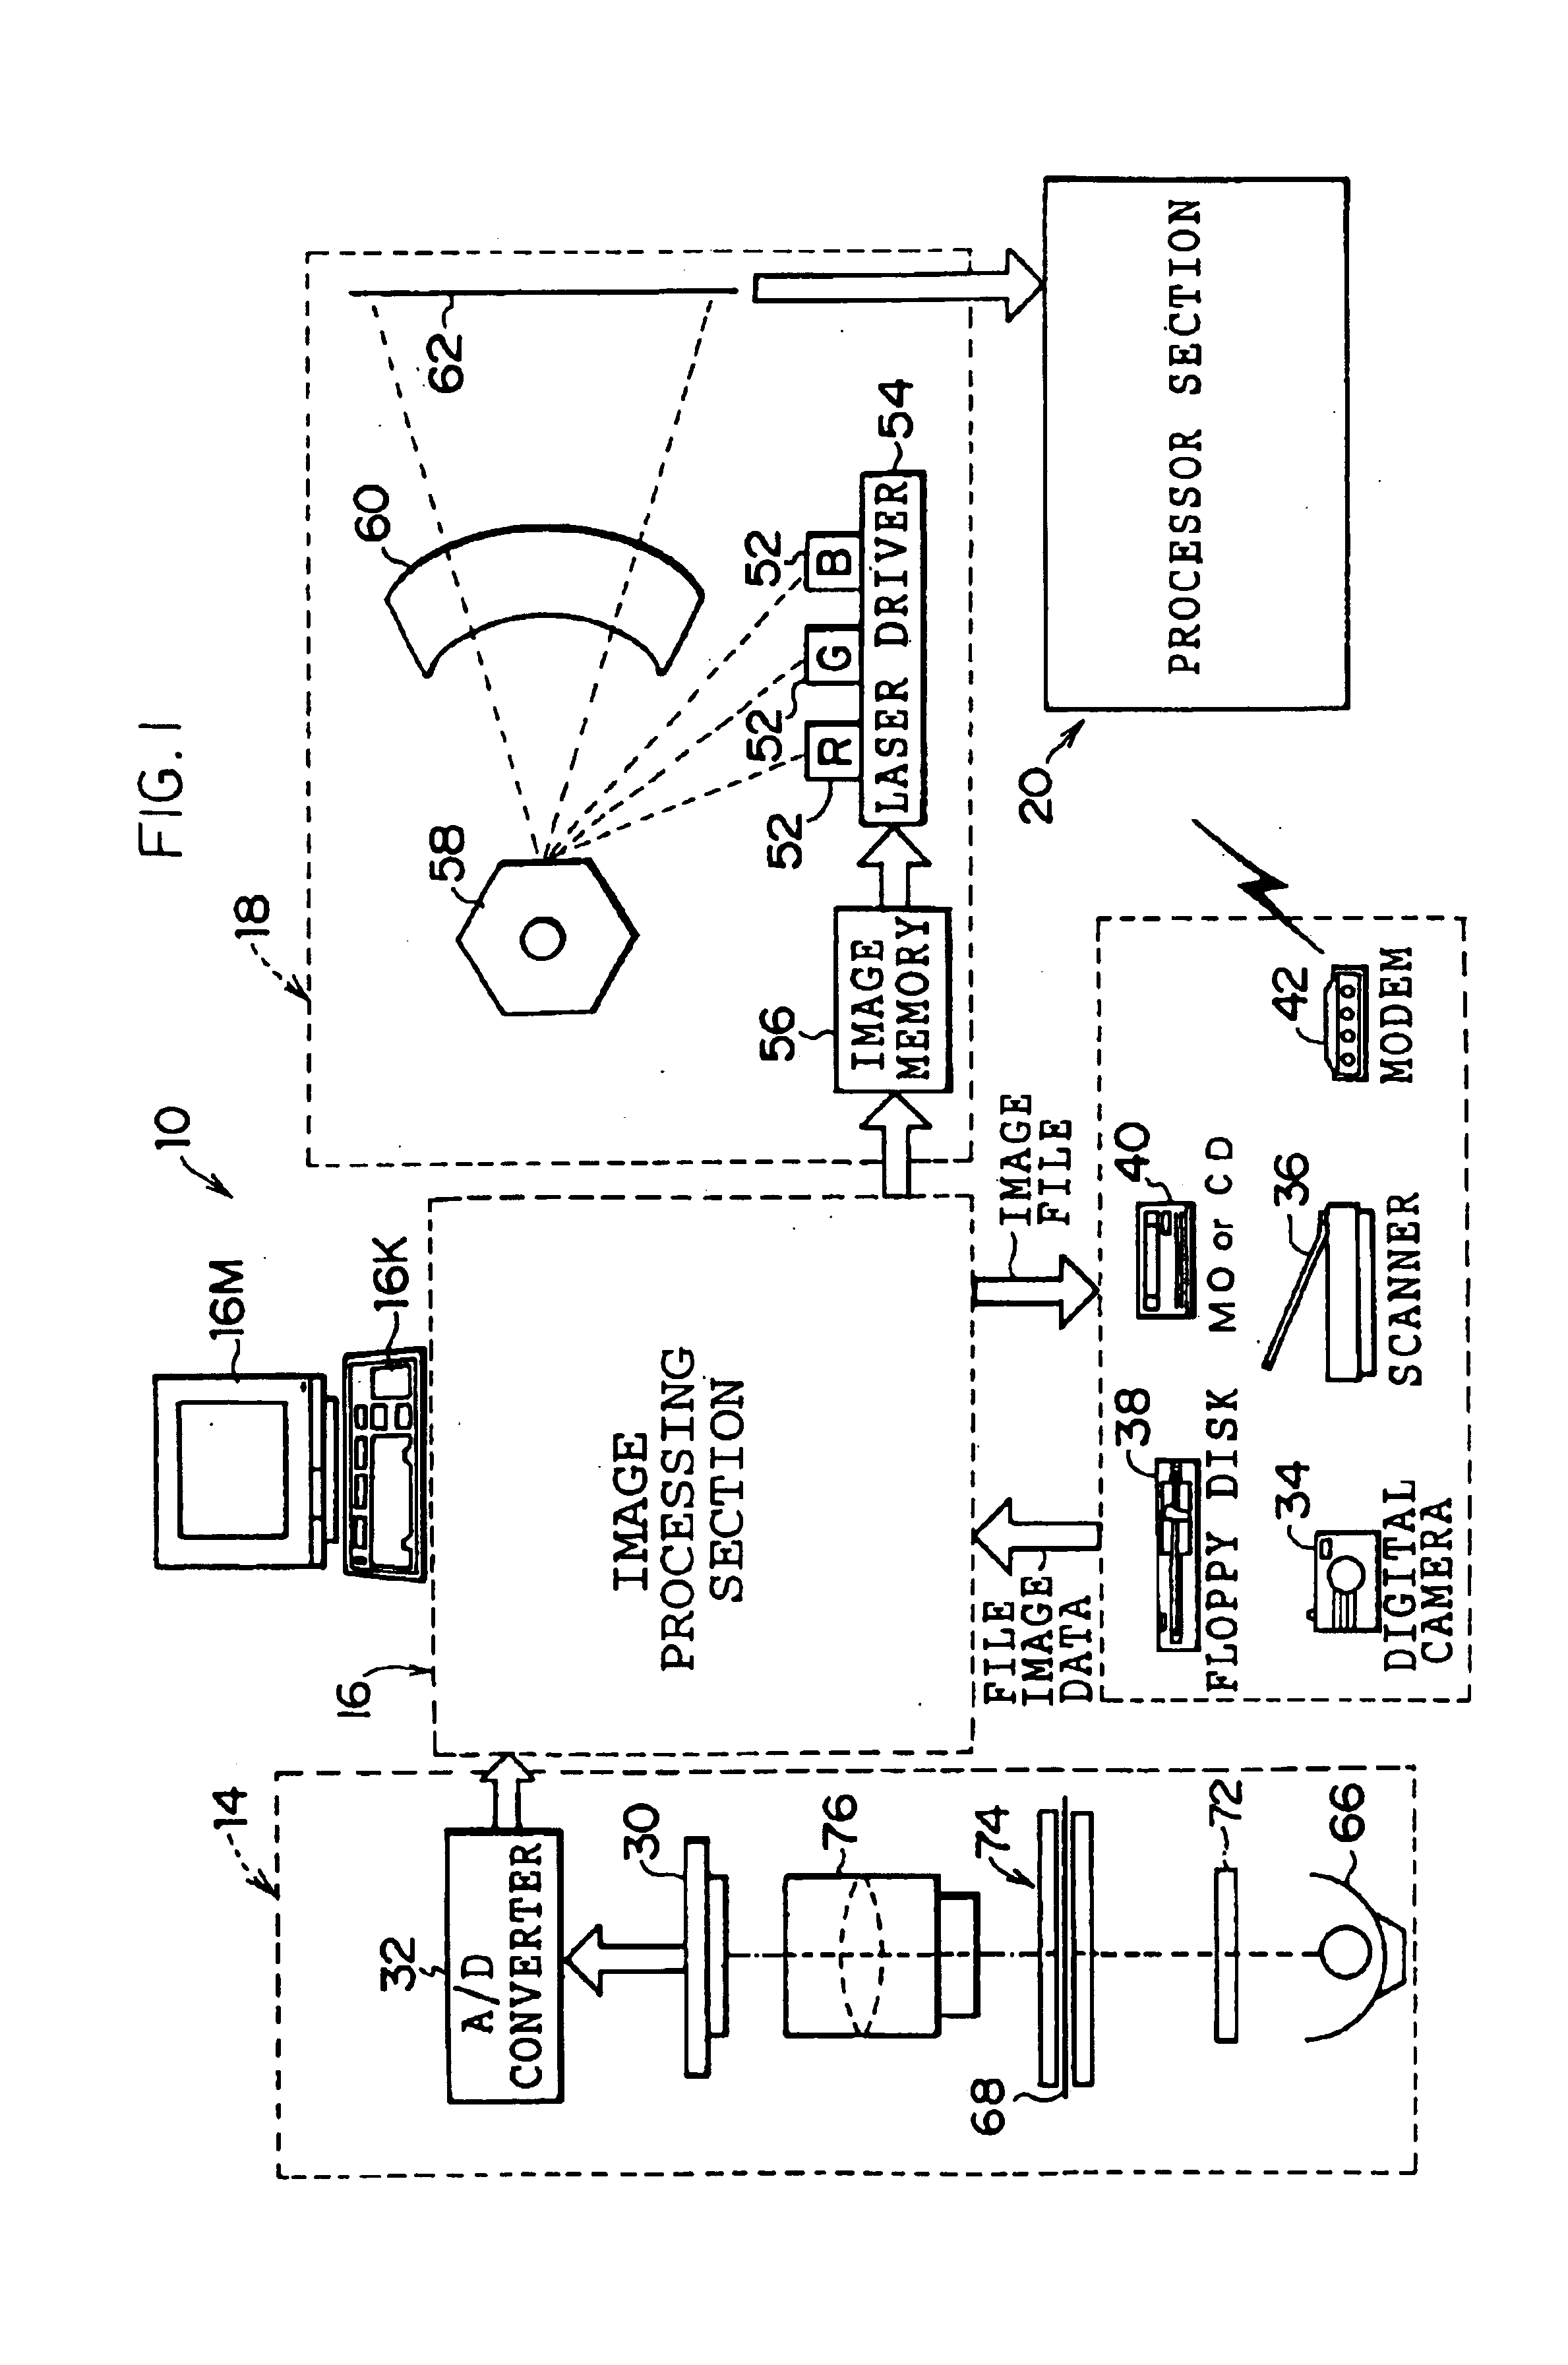 System and method for correcting aberration of lenses through which images are projected